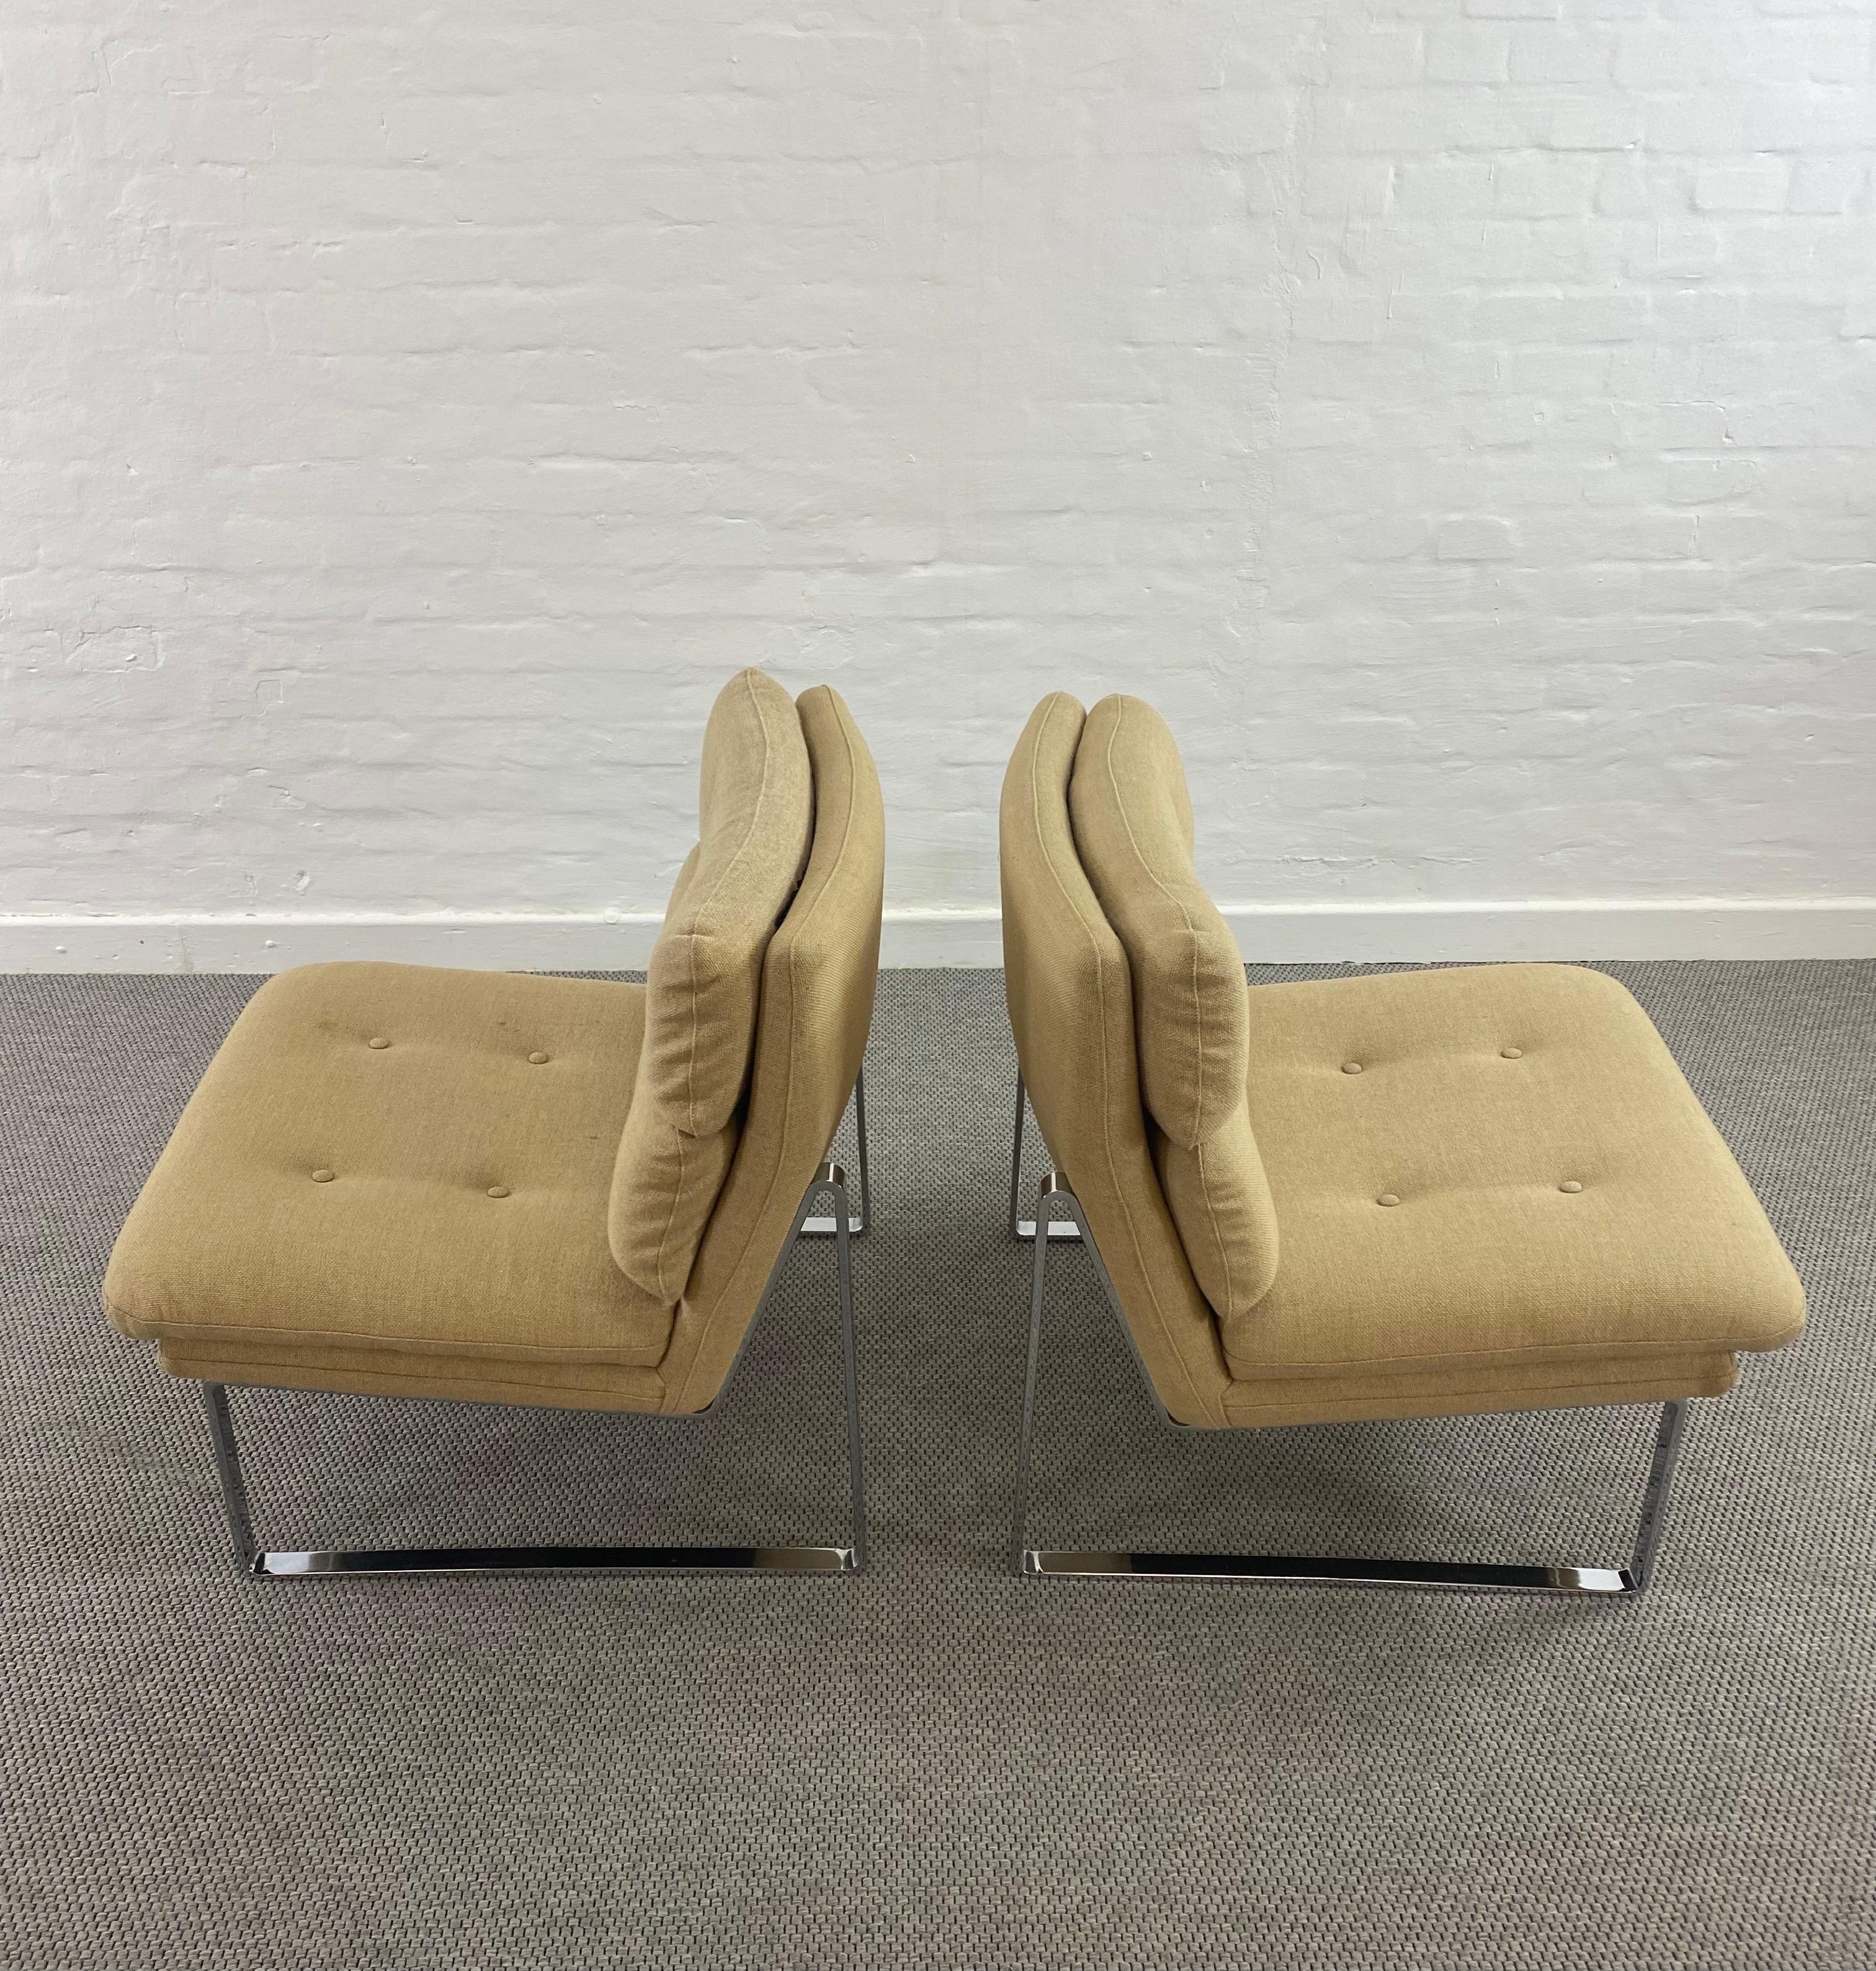 Pair of Midcentury Steel Cocktail Chair from Miller Borgsen by Röder & Söhne 2